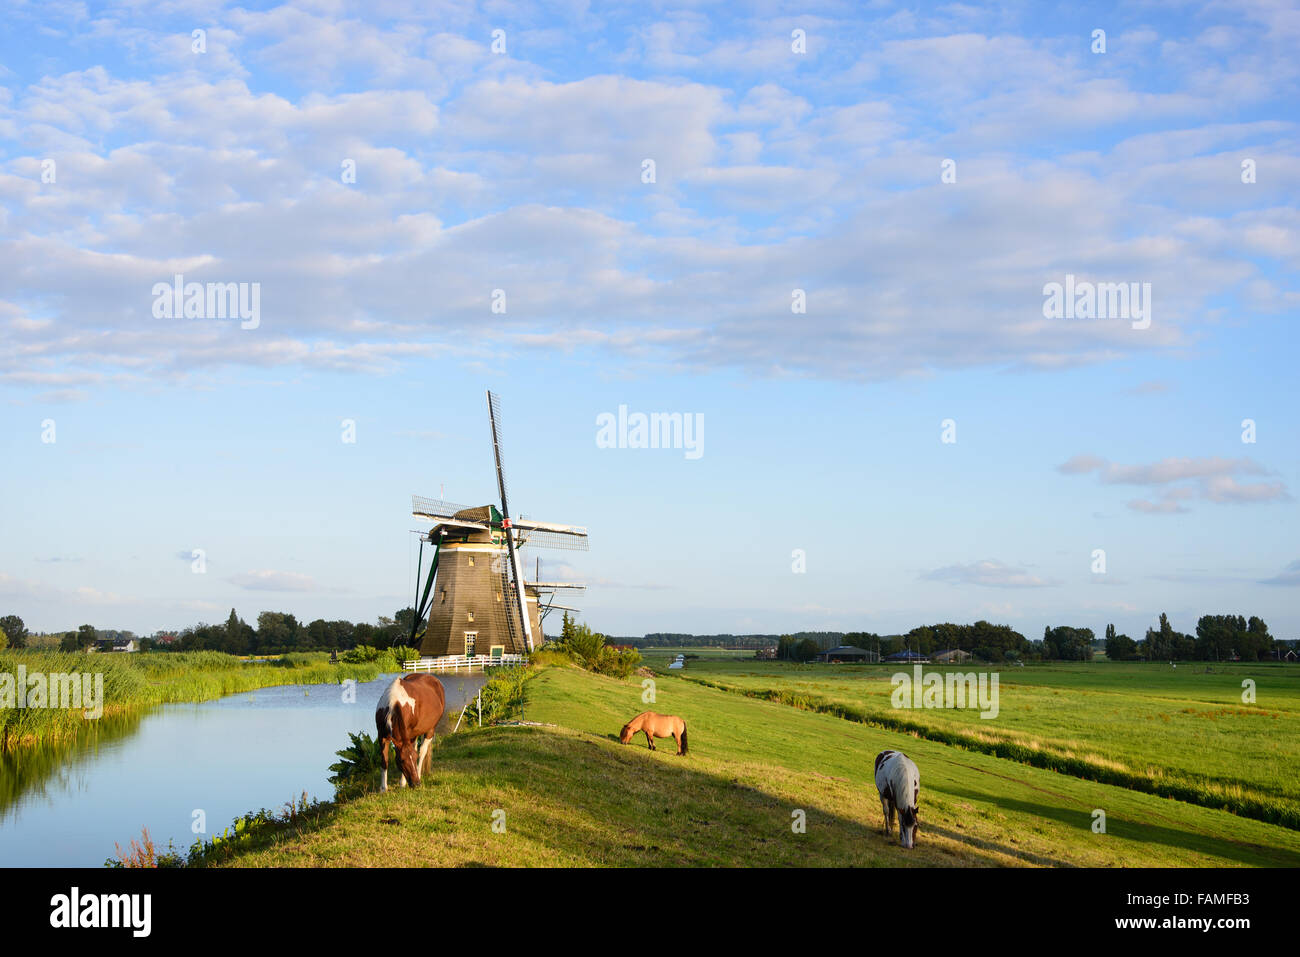 Three horses on a dyke next to a canal in a rural landscape with three windmills in the Netherlands. Stock Photo